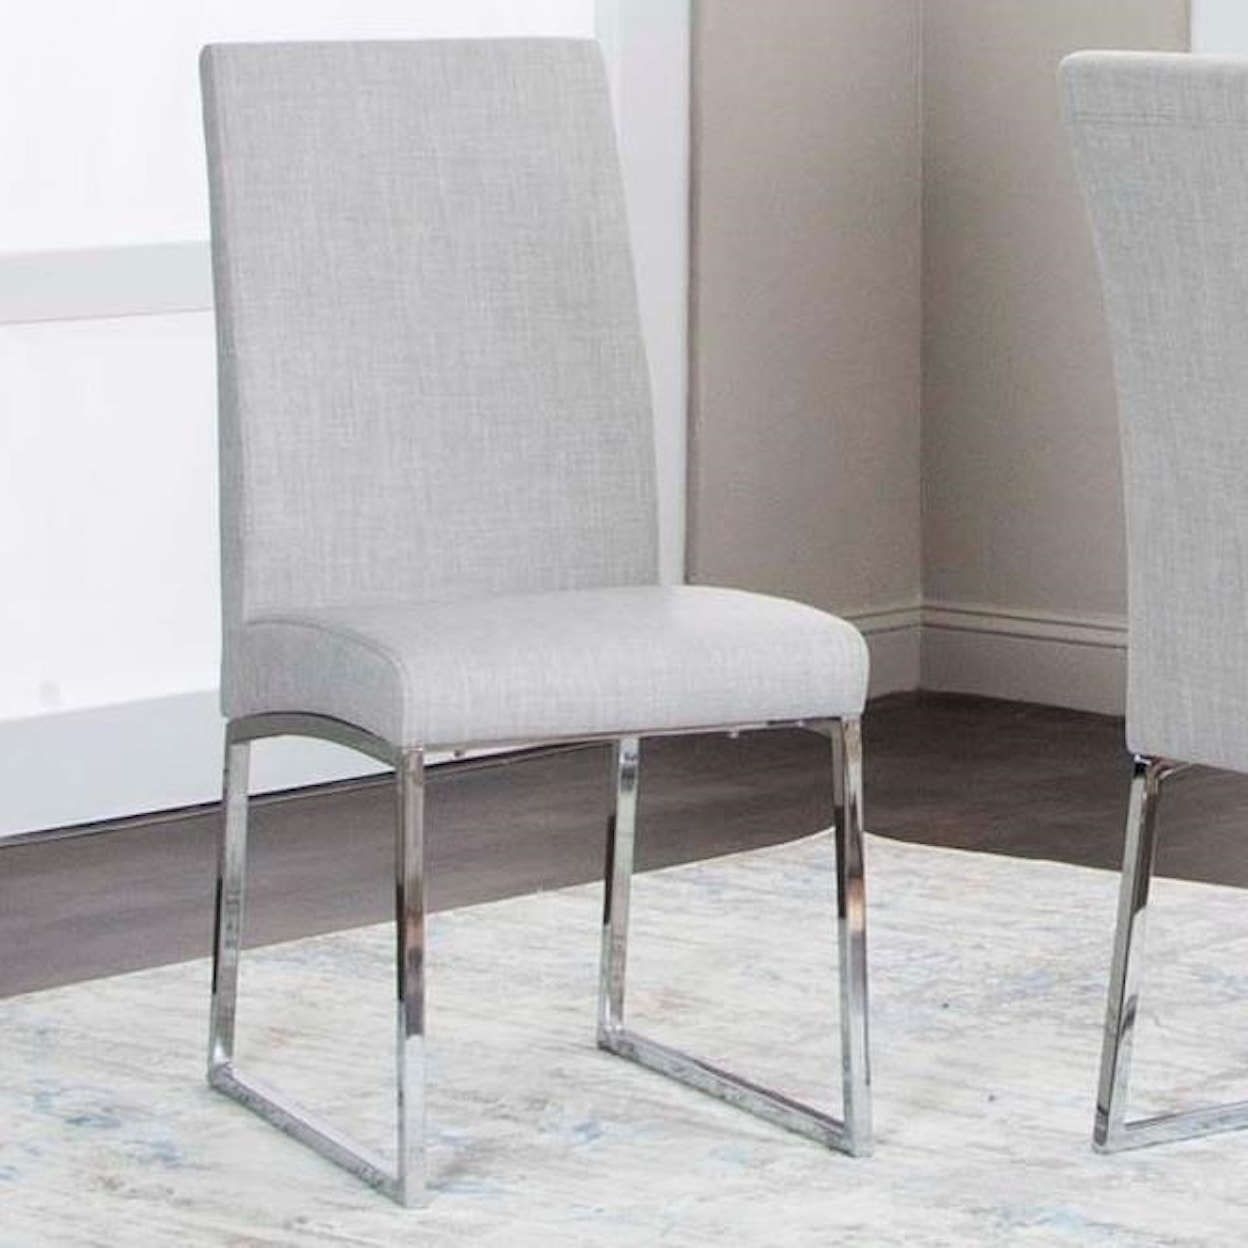 Cramco, Inc Classic Light Gray Tweed/Stainless Steel Side Chair 